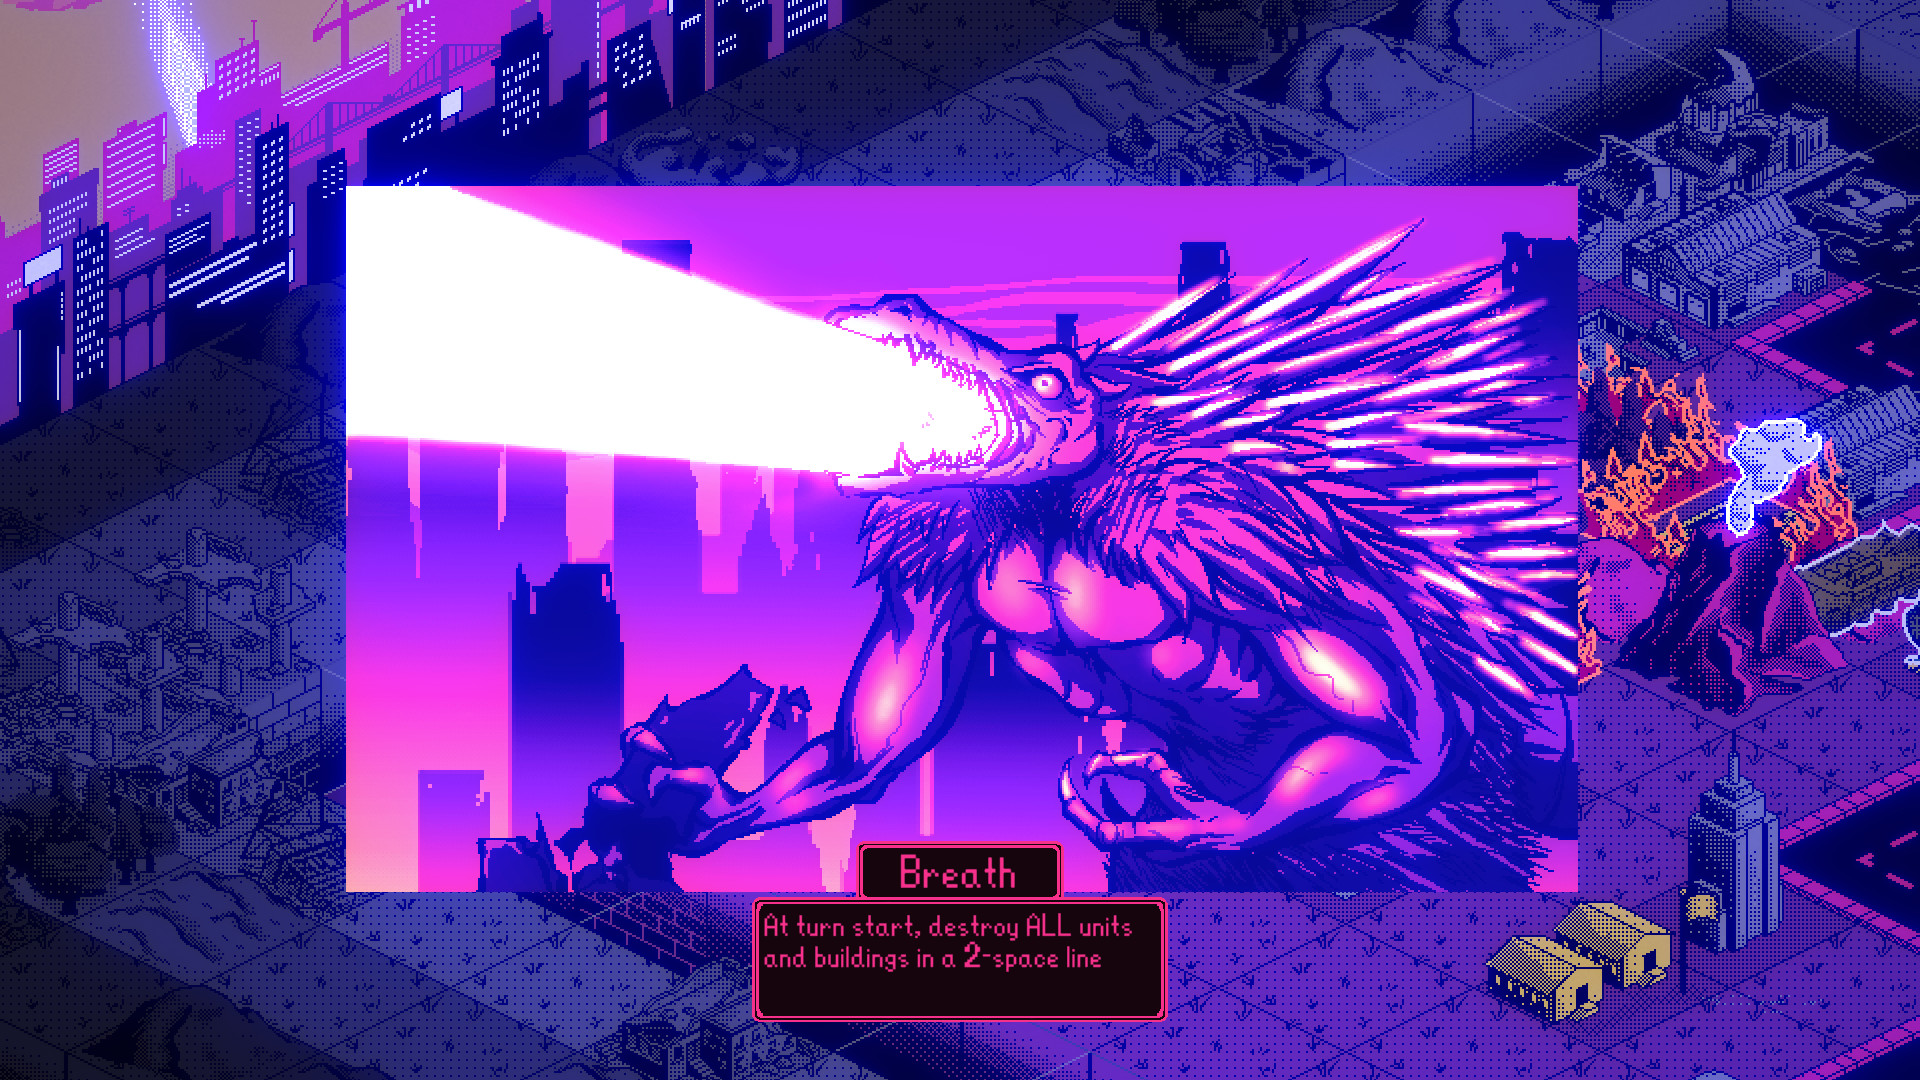 Kaiju Wars updates its free demo to let you be the monster for Godzilla Day